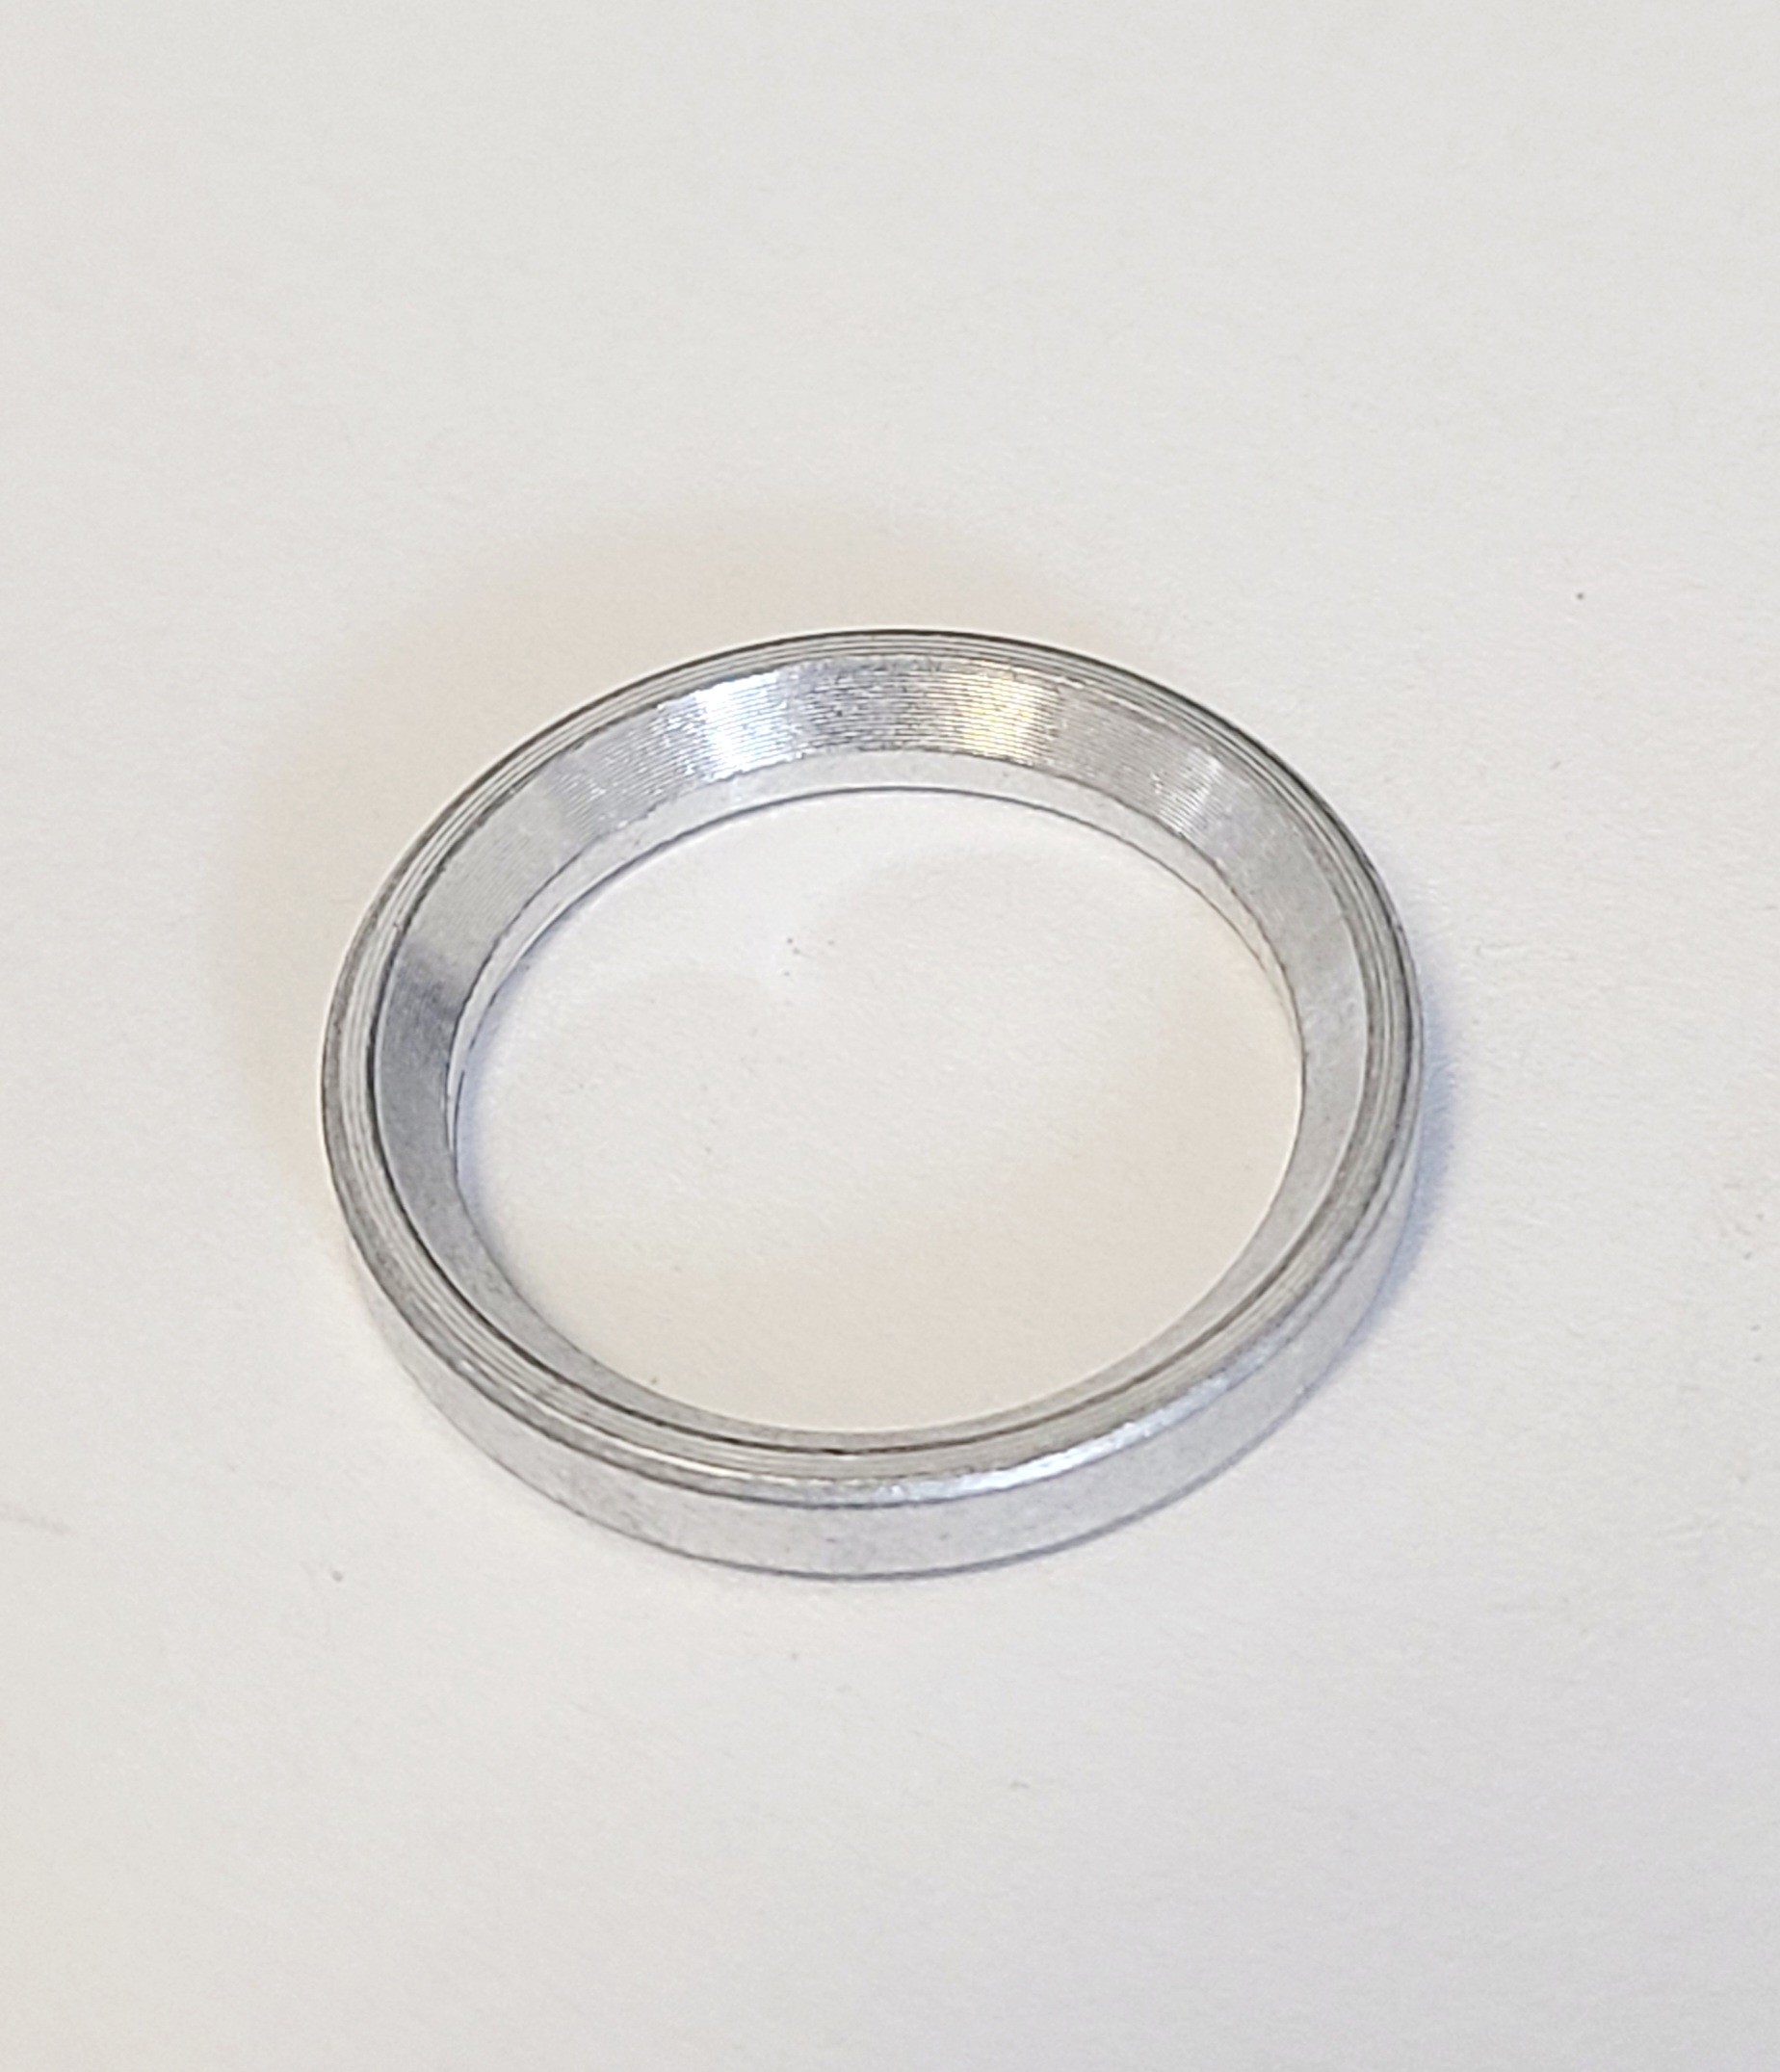 Hilliard Bevel Washer - Silver - 1/8" thick